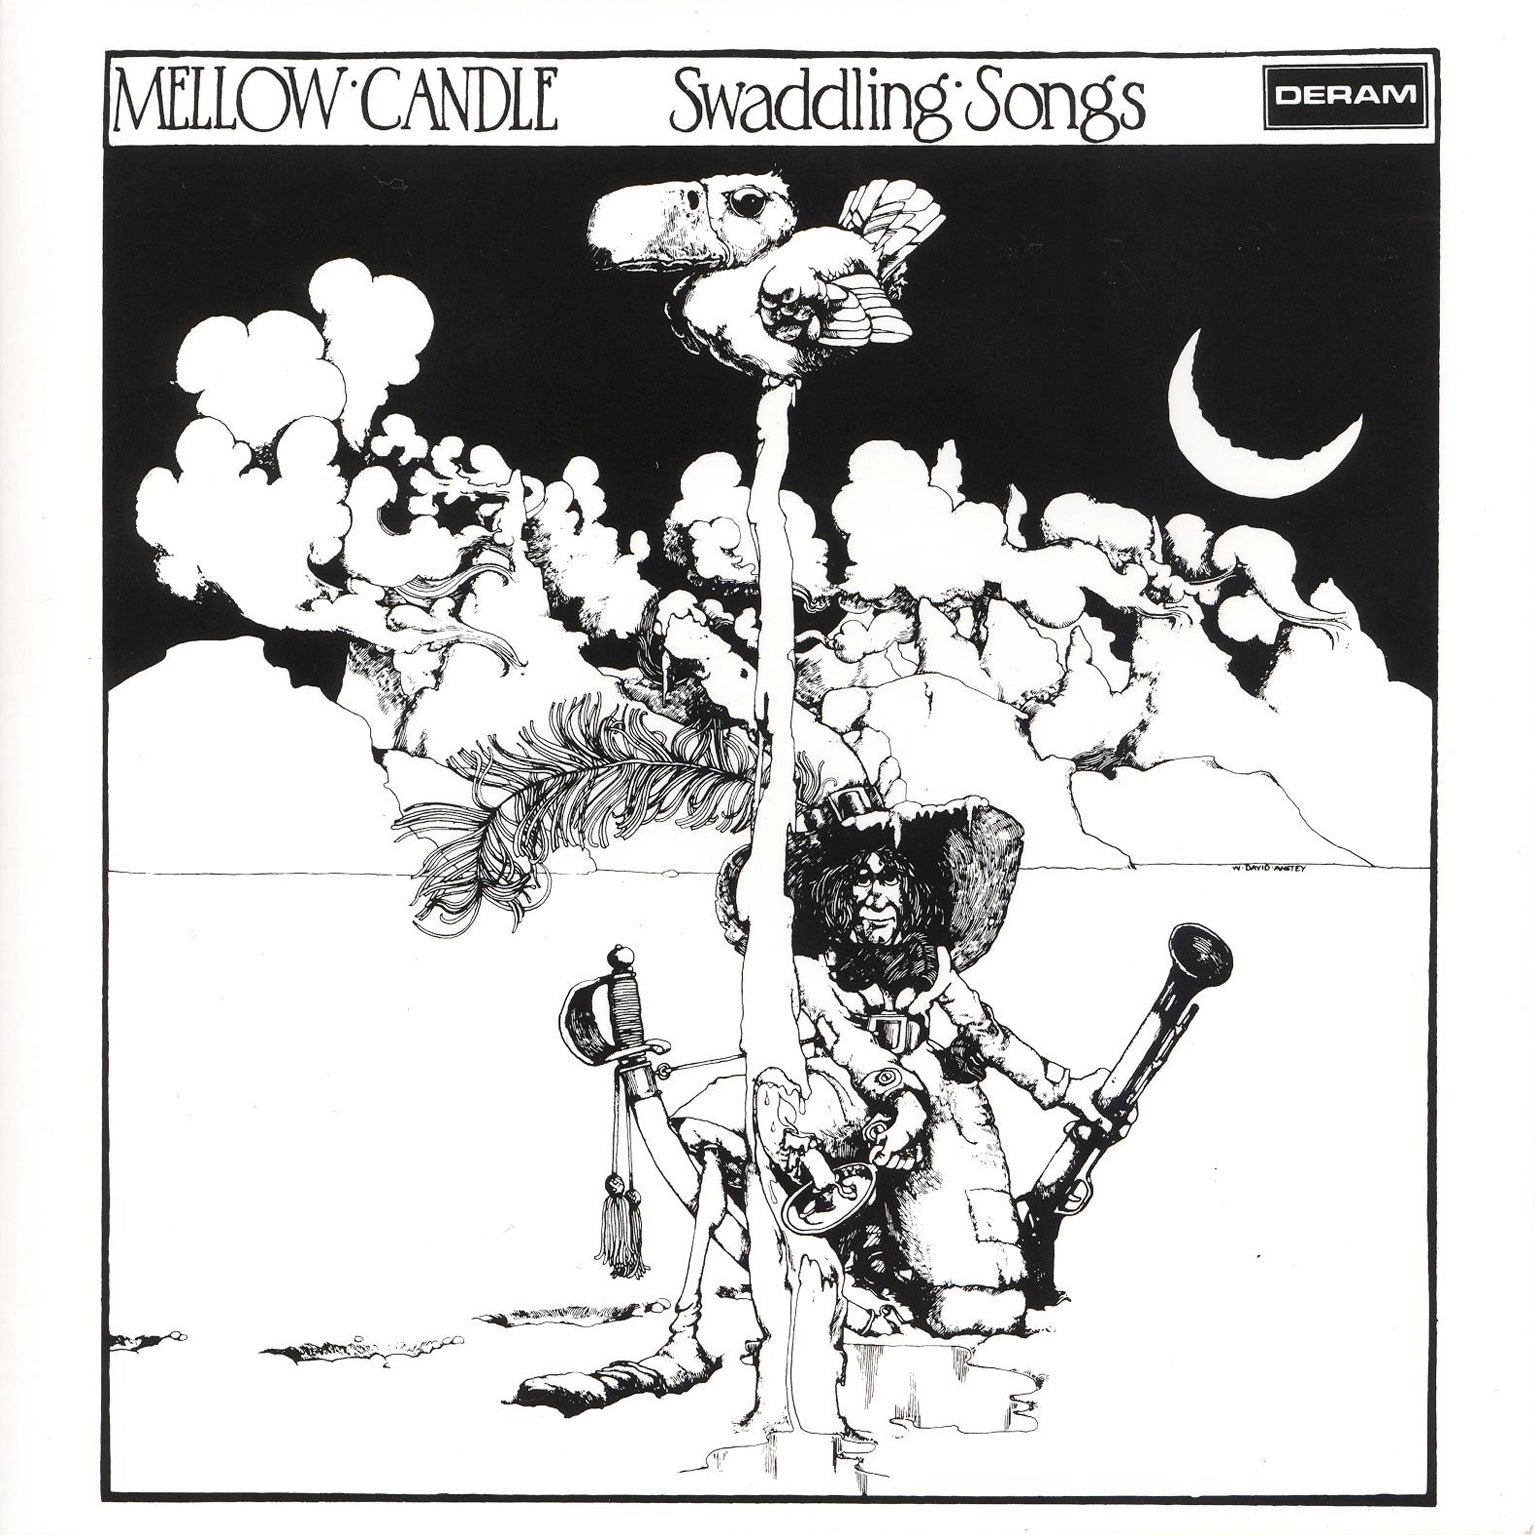 MELLOW CANDLE - Swaddling Songs - LP Limited White Vinyl [RSD2020-AUG29]